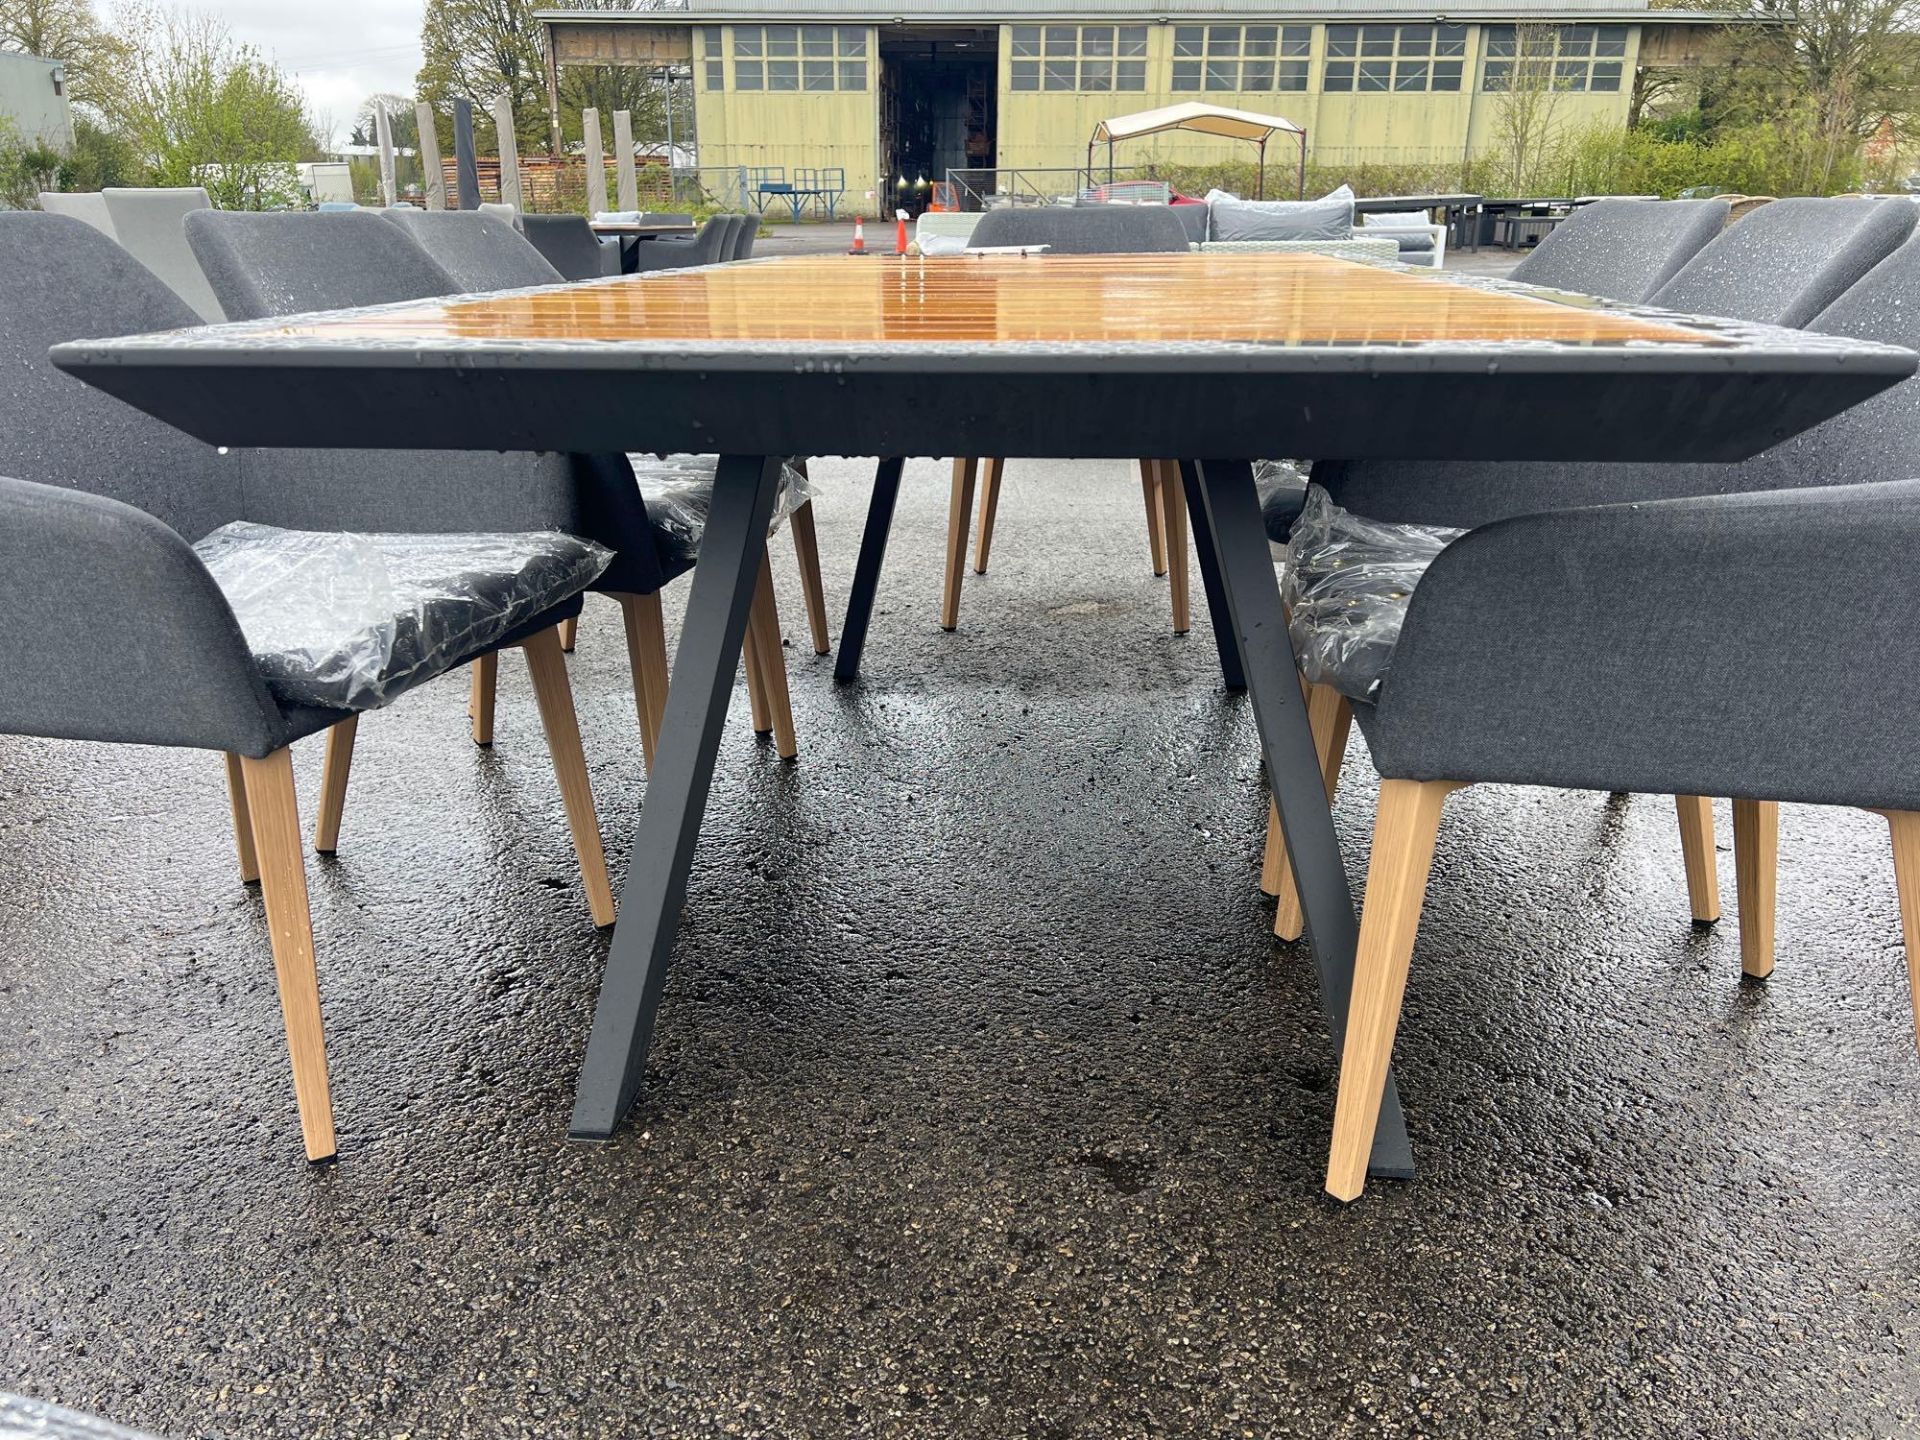 A110 Entesi 210 x 110cm Teak Table with 8 x Fabric Chairs - Image 4 of 5